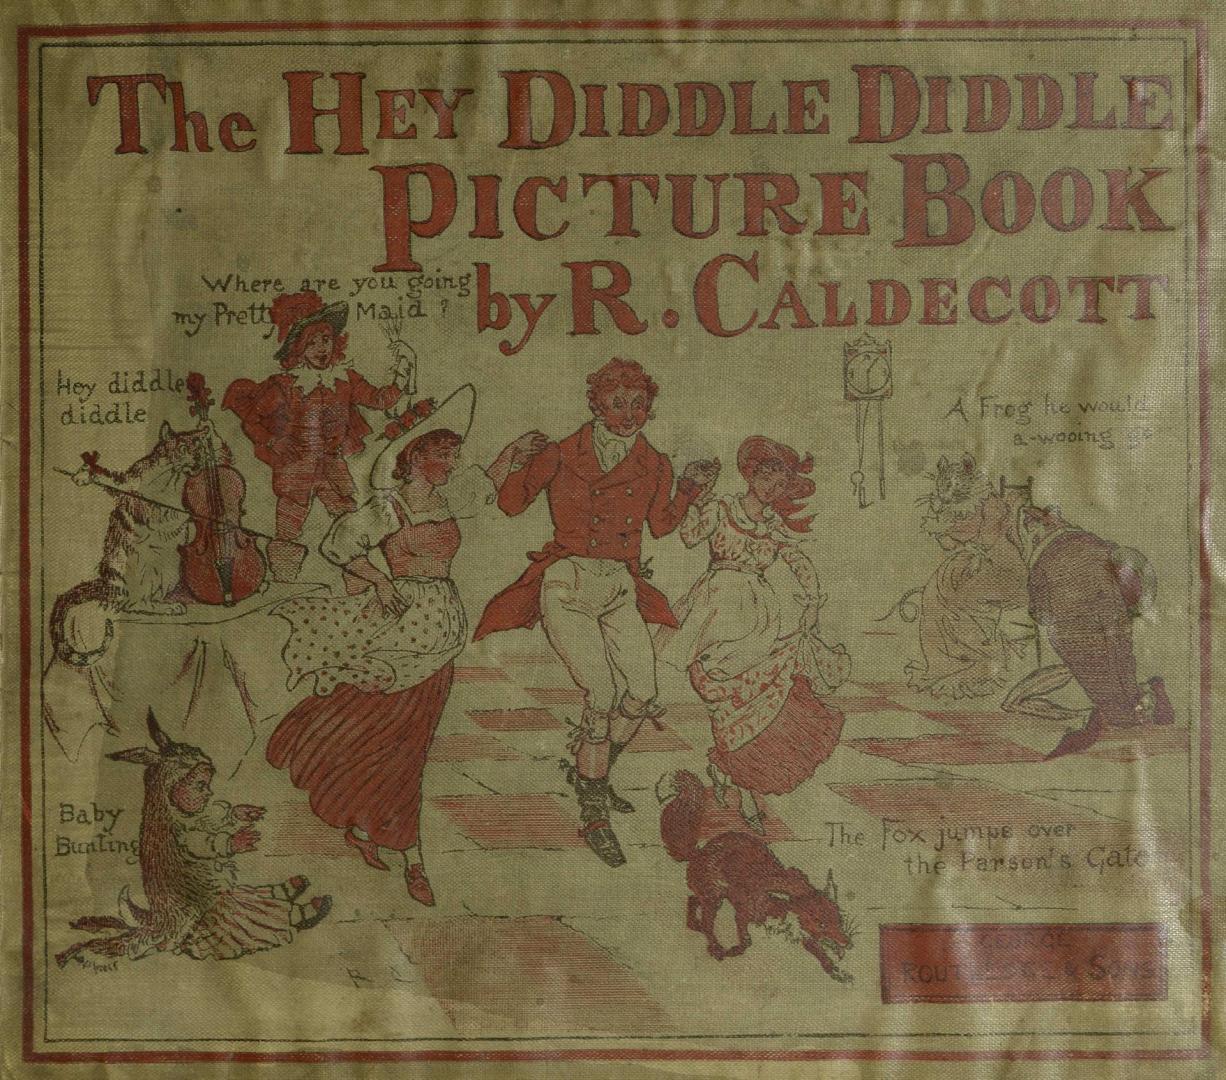 The hey diddle diddle picture book